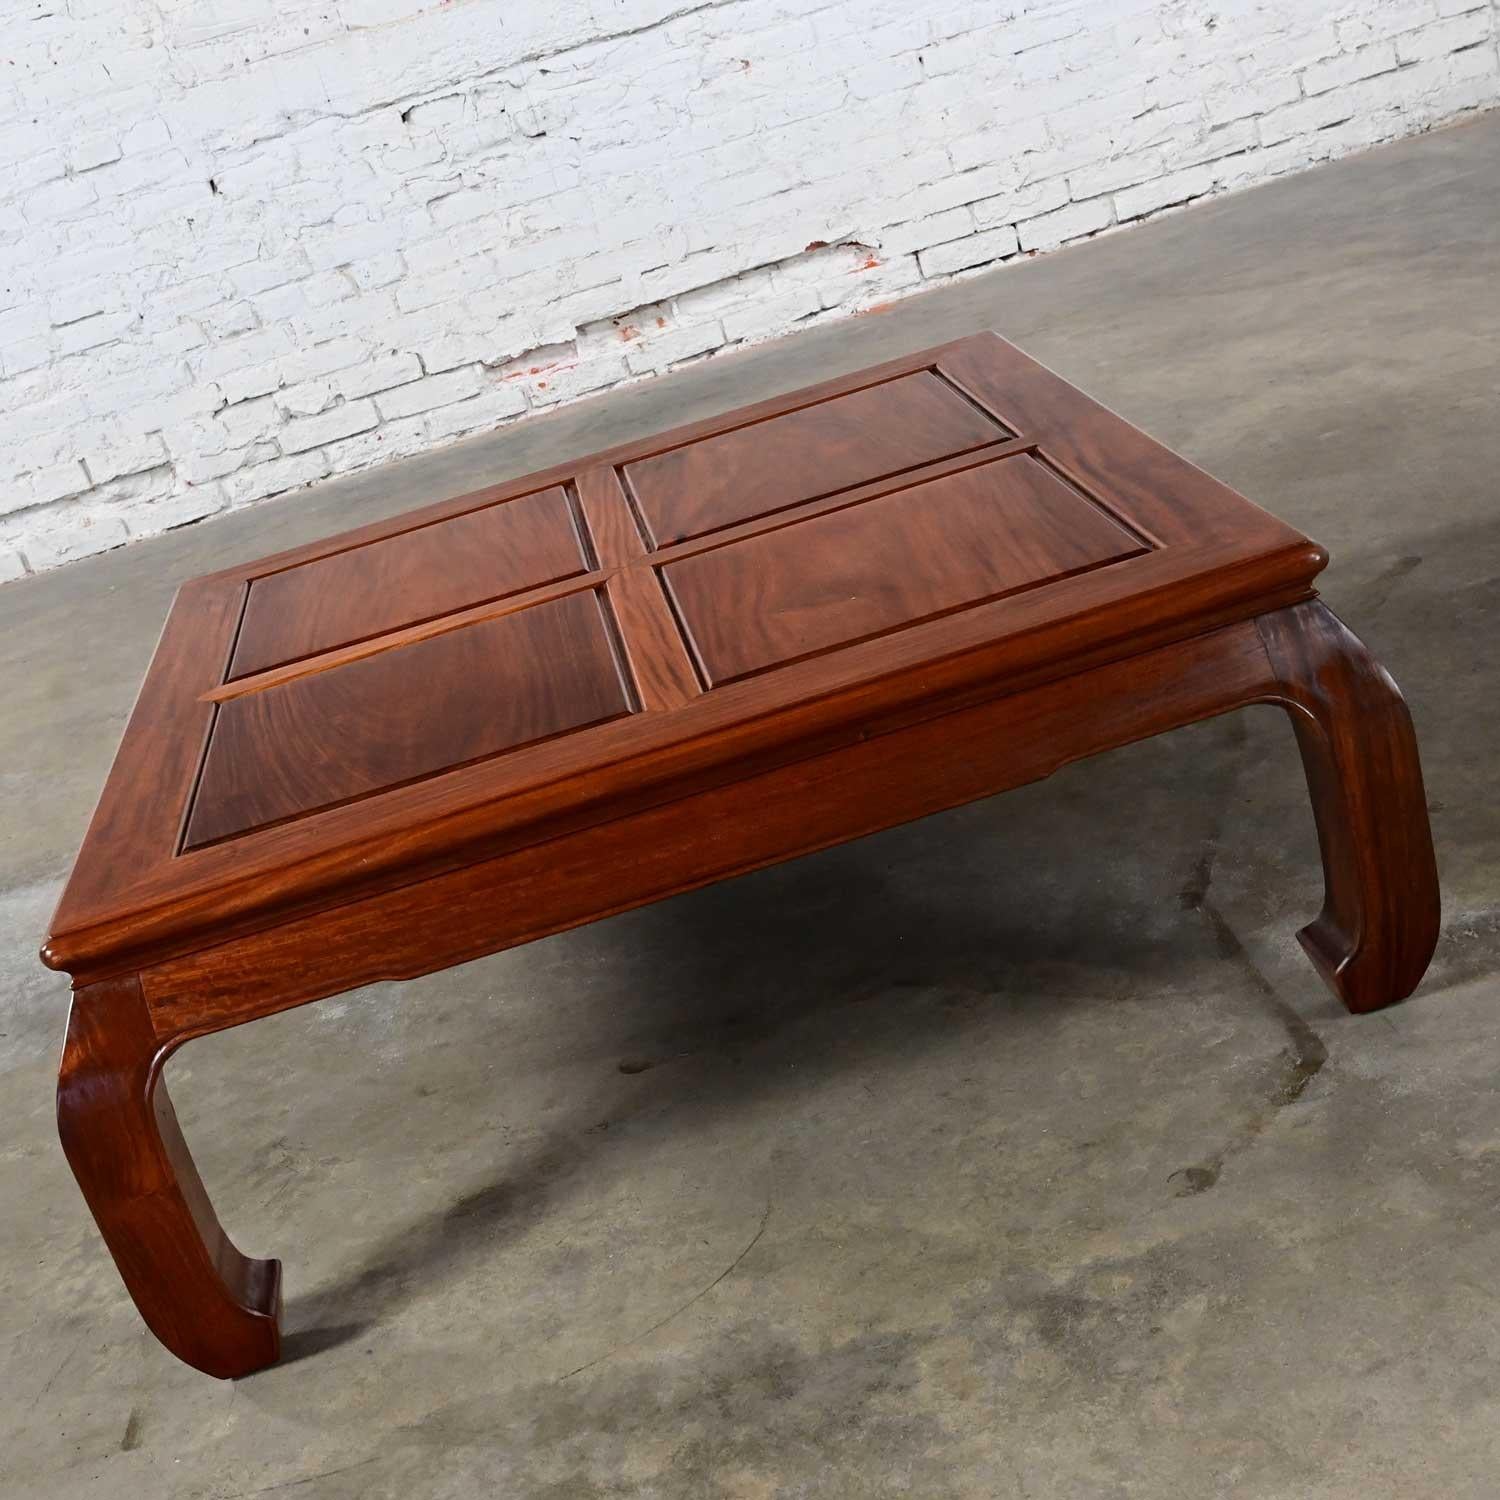 Stunning vintage Ming Cow leg style solid rosewood square coffee table. Beautiful condition, keeping in mind that this is vintage and not new so will have signs of use and wear. We found a couple small water spots on the top but very hard to see.